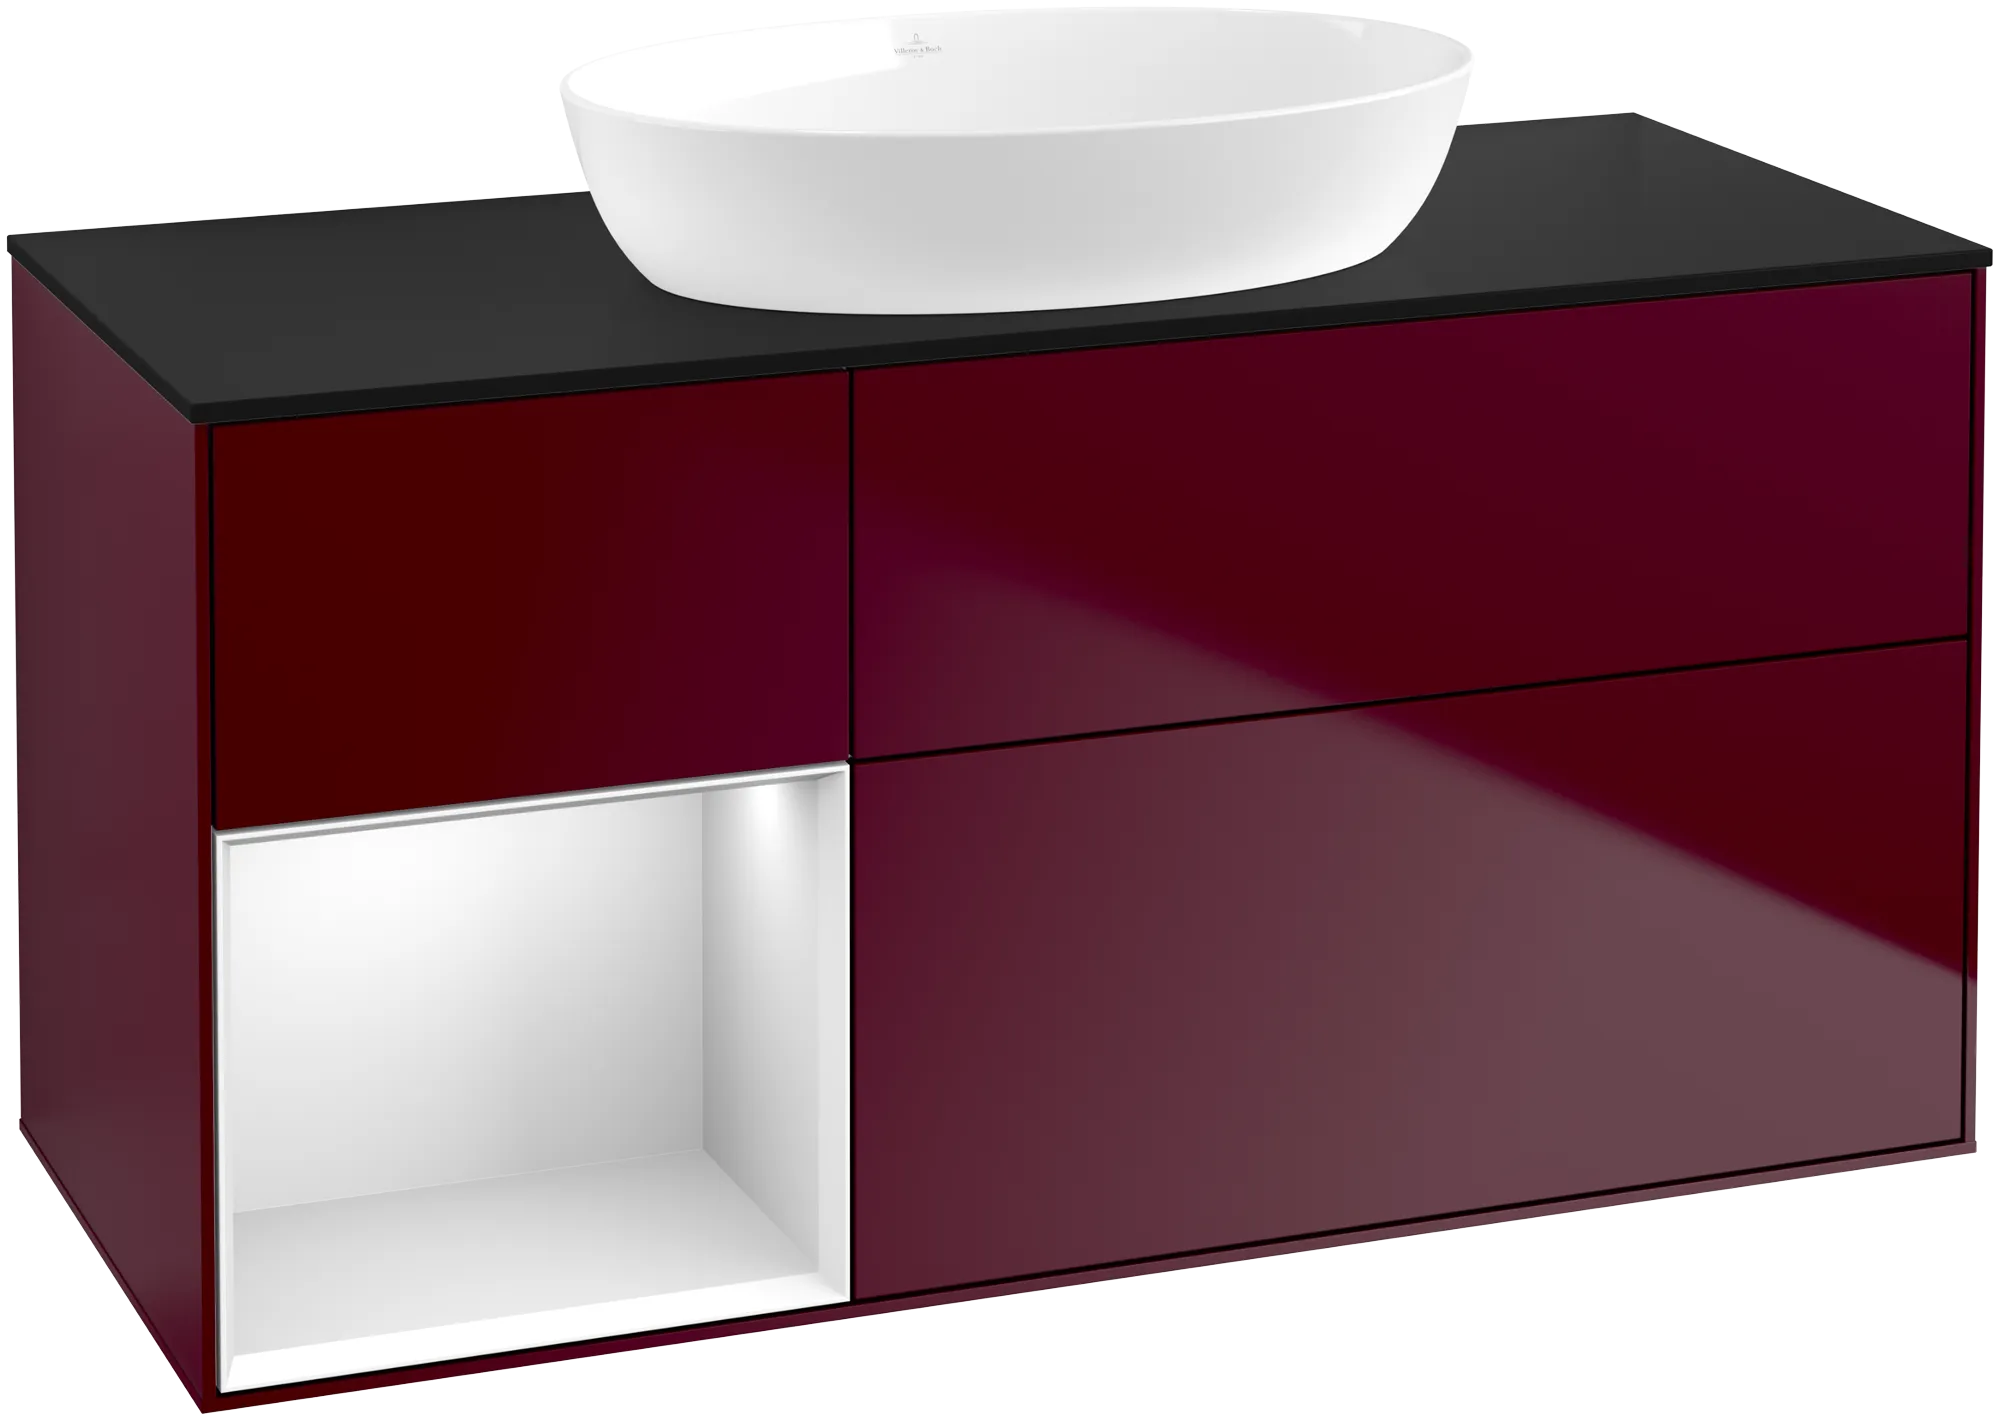 Picture of VILLEROY BOCH Finion Vanity unit, with lighting, 3 pull-out compartments, 1200 x 603 x 501 mm, Peony Matt Lacquer / White Matt Lacquer / Glass Black Matt #FA62MTHB